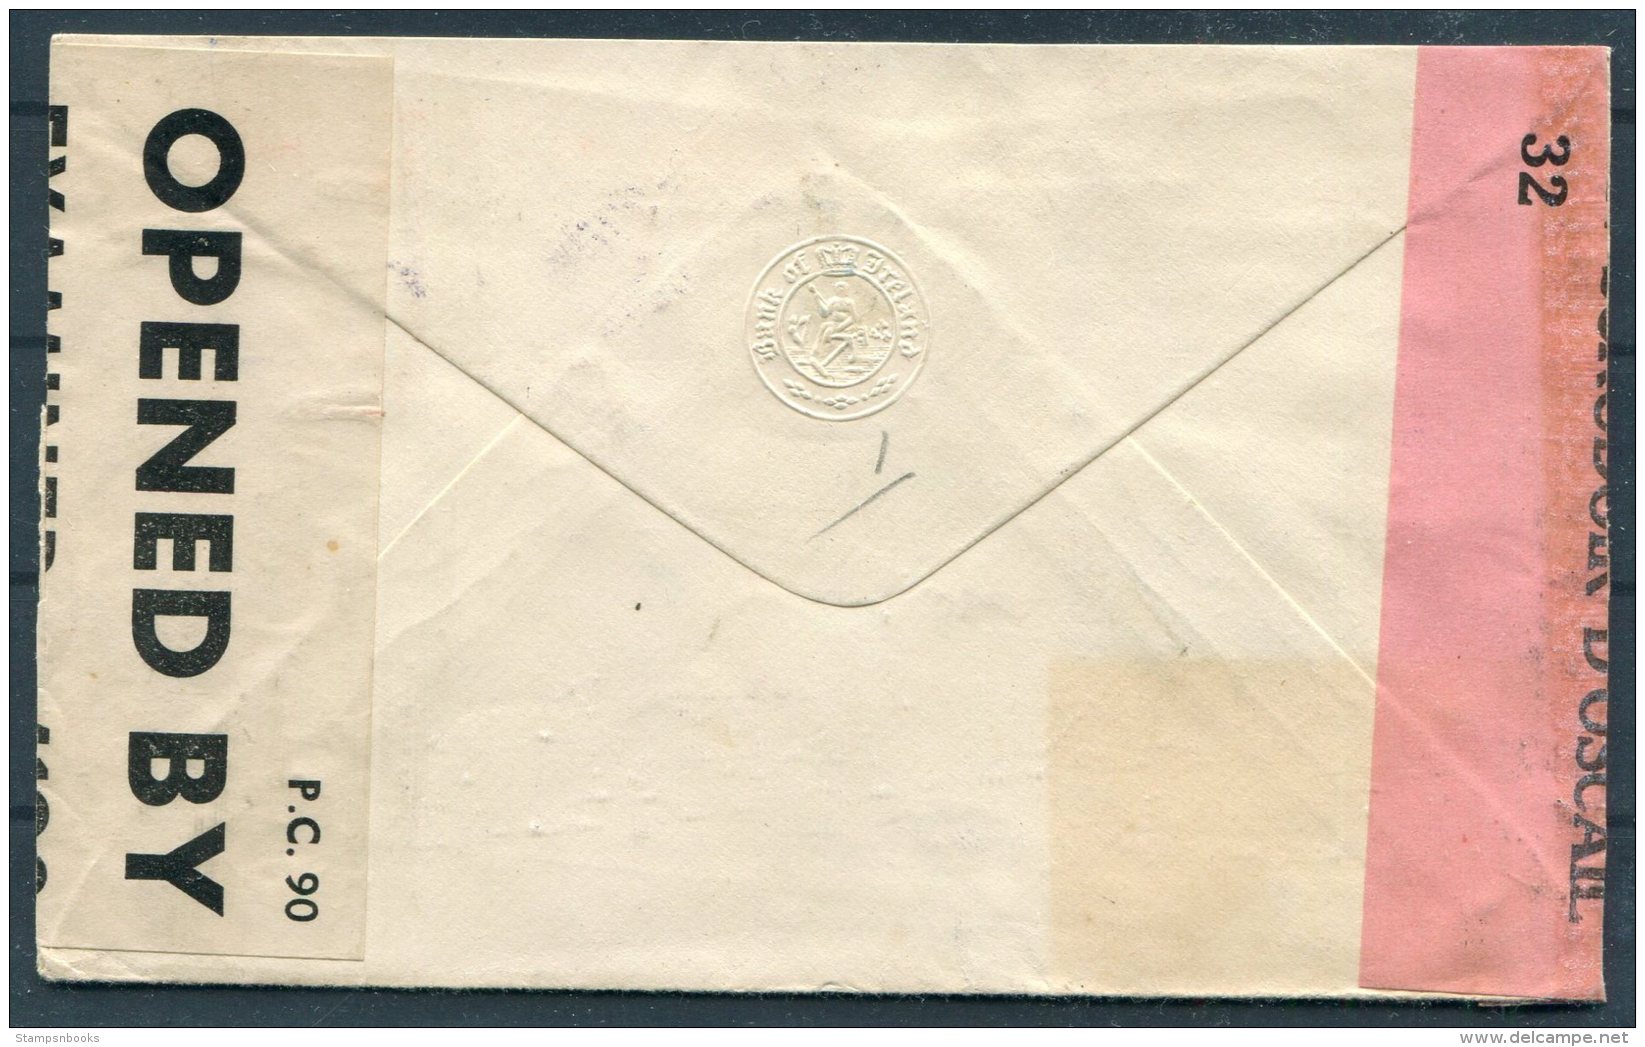 1944 Eire Censor Cover Bank Of Ireland - Credit Suisse, Zurich Switzerland - Covers & Documents